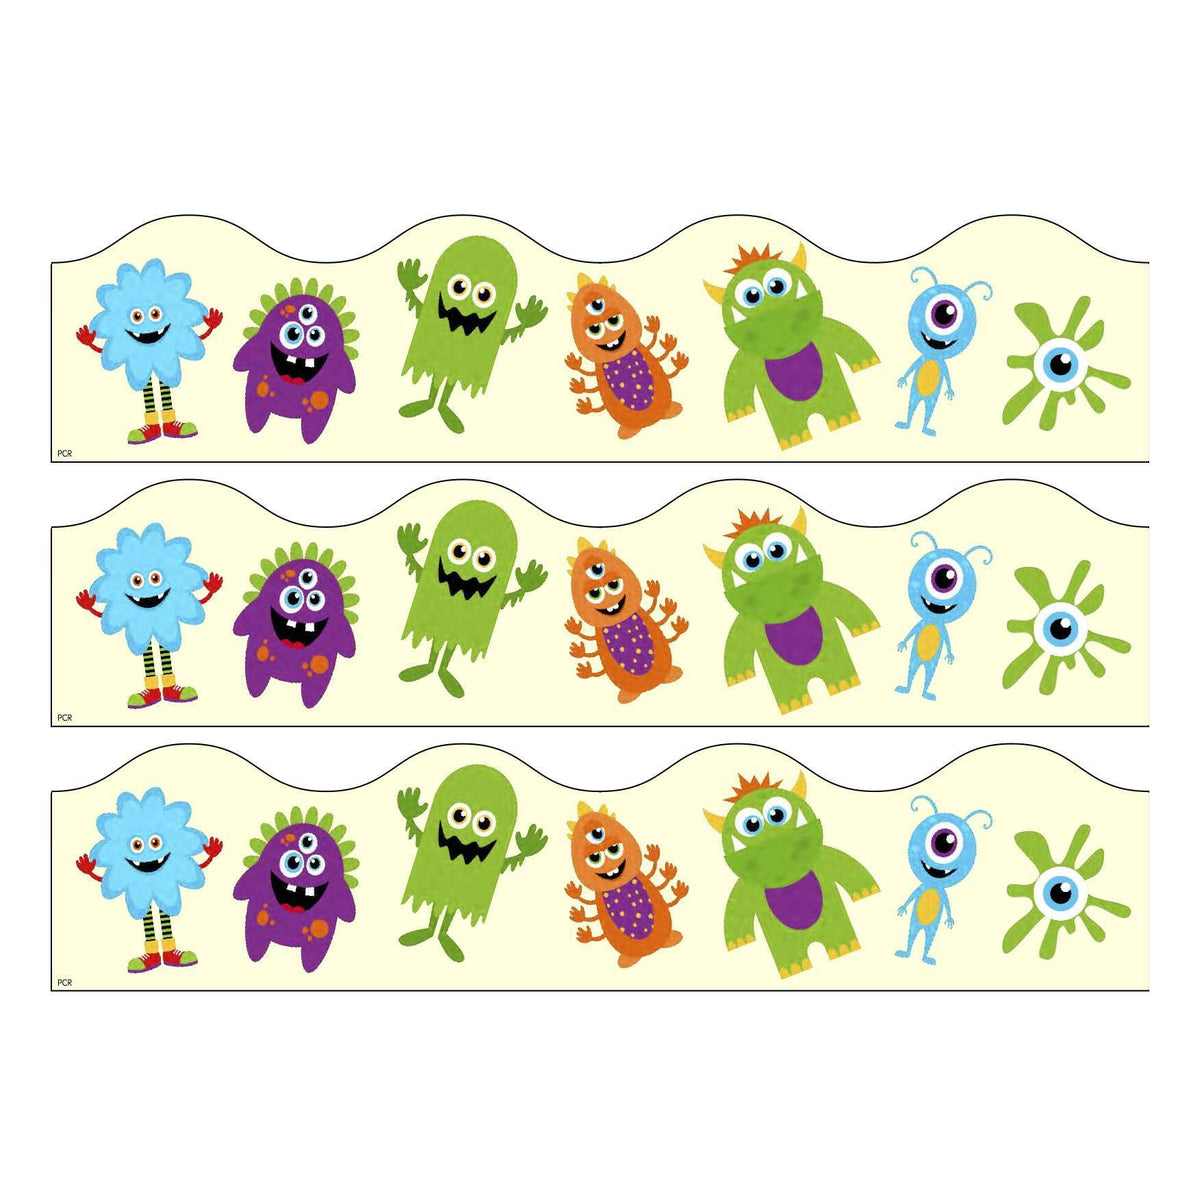 print-your-own-display-borders-monsters-design-primary-classroom-resources